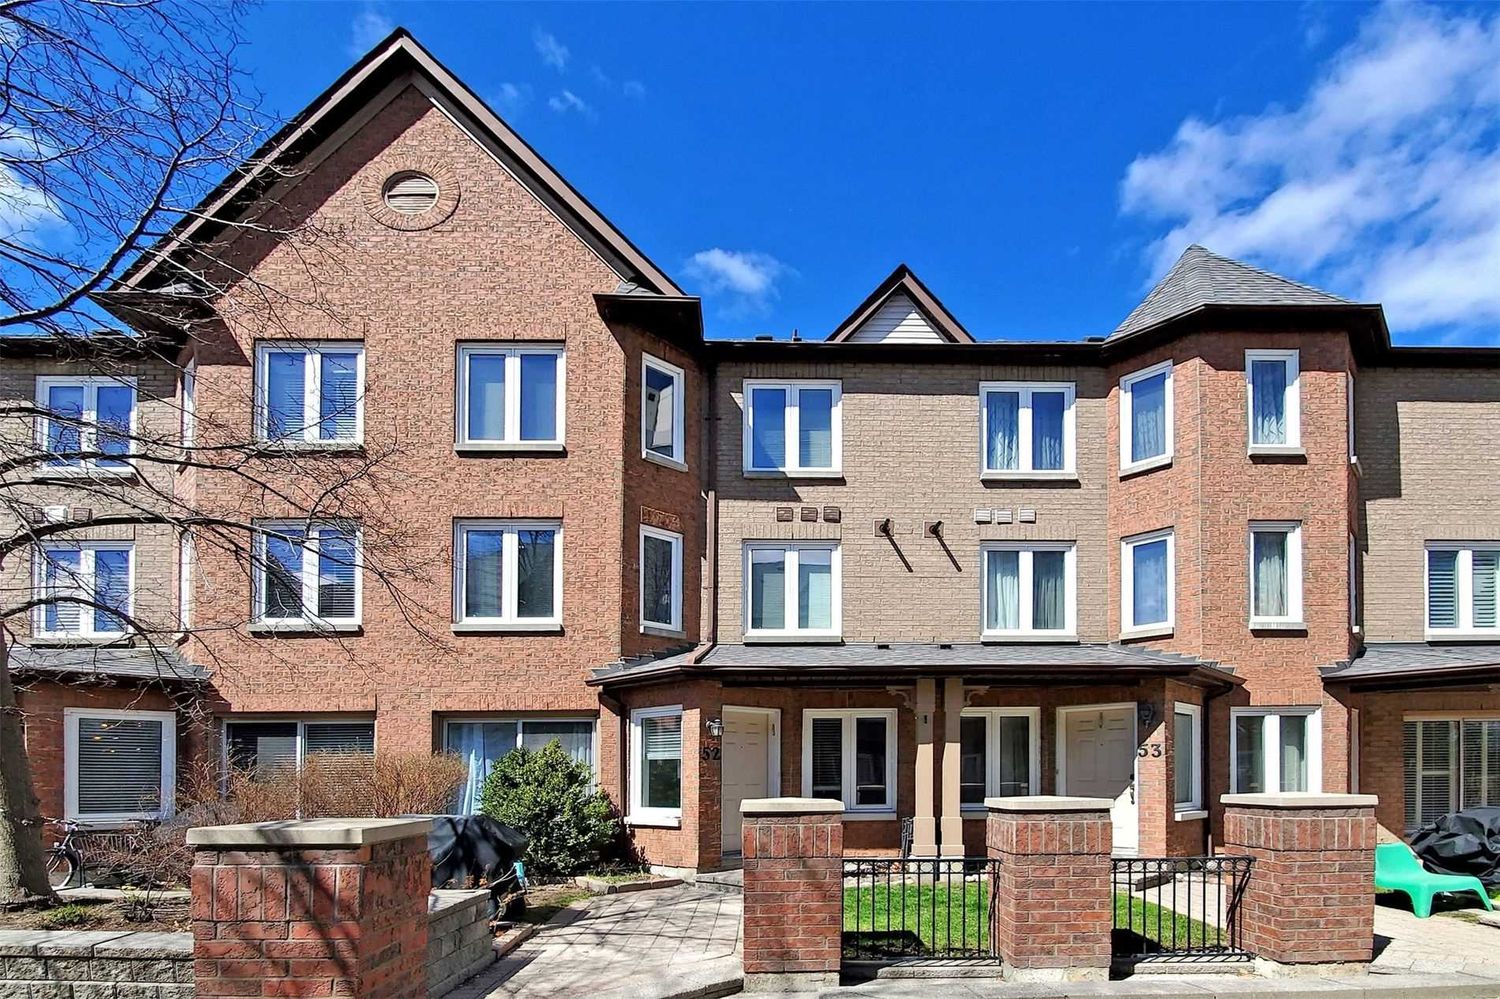 735 New Westminster Drive. 735 New Westminster Dr Townhomes is located in  Vaughan, Toronto - image #1 of 3